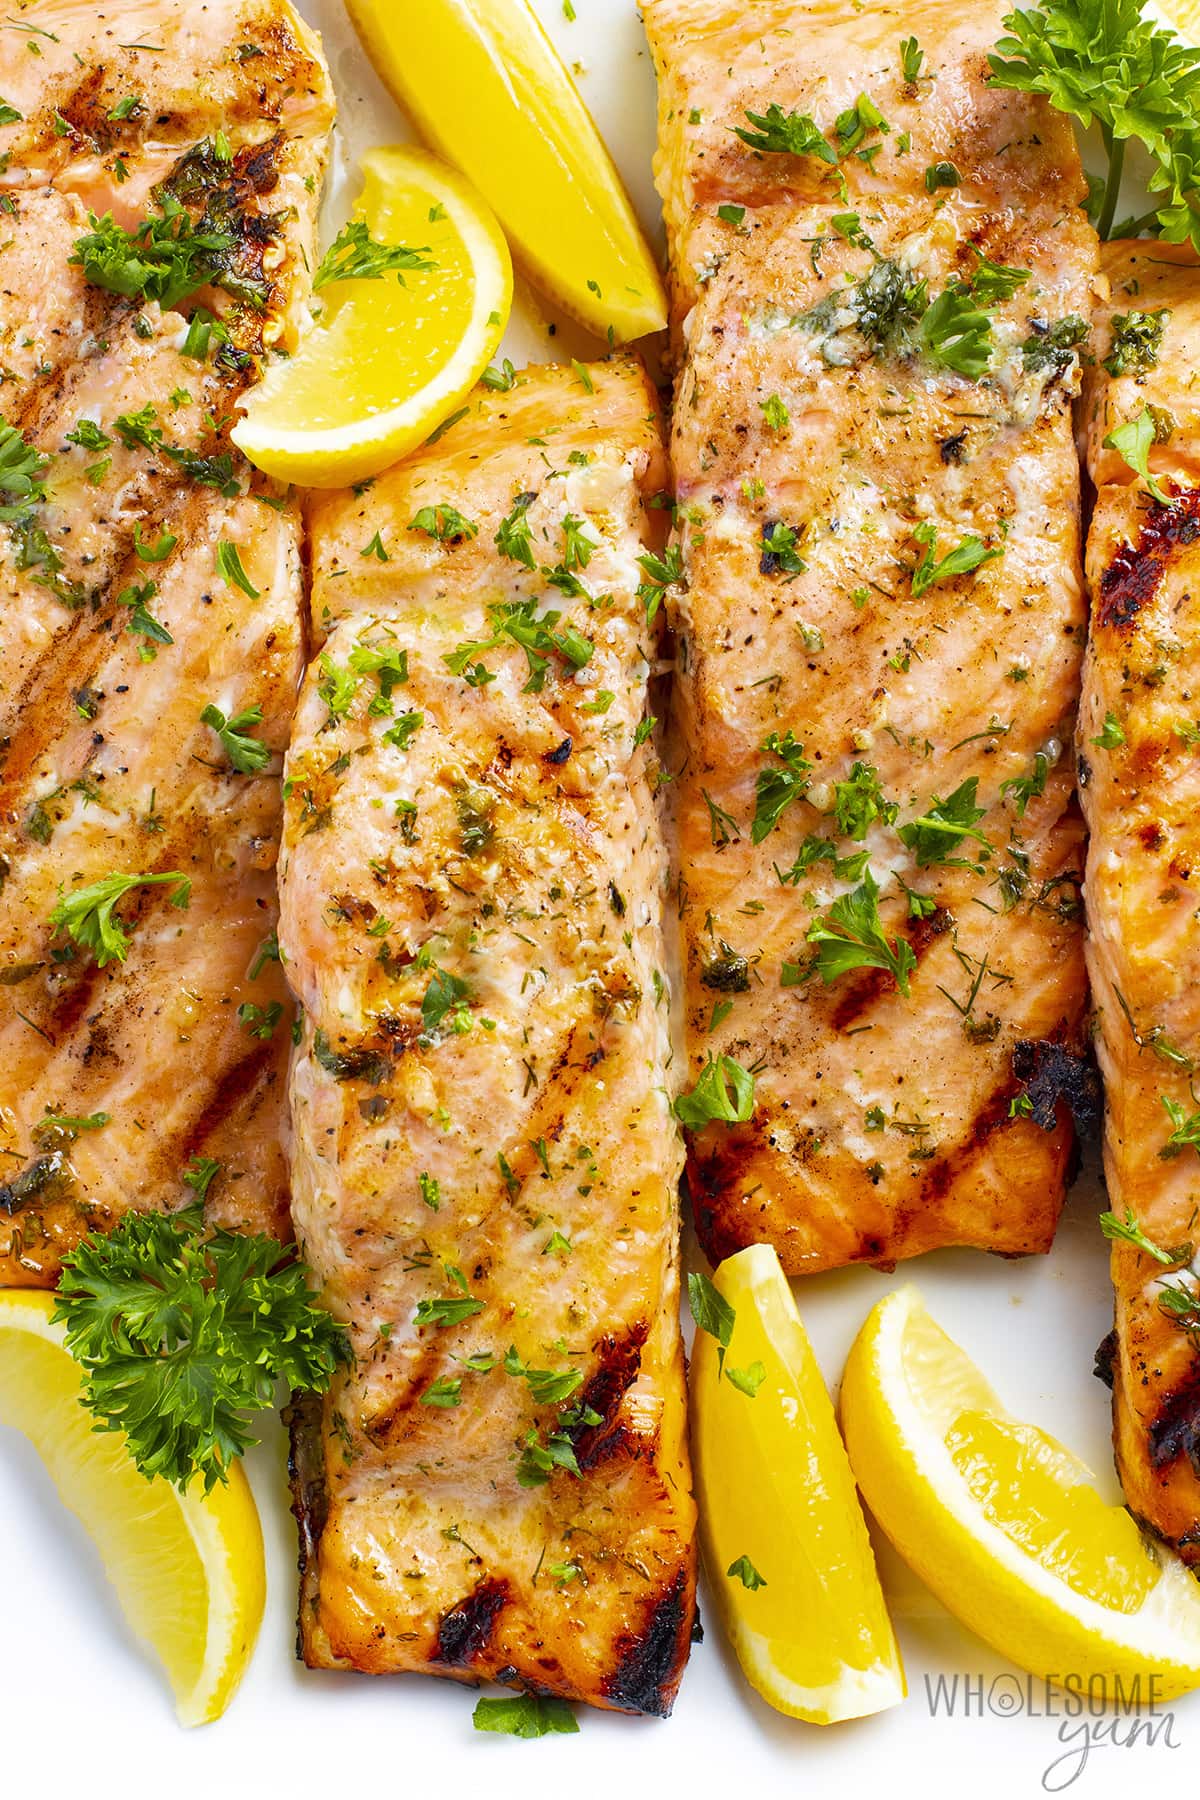 Grilled salmon with lemon slices.